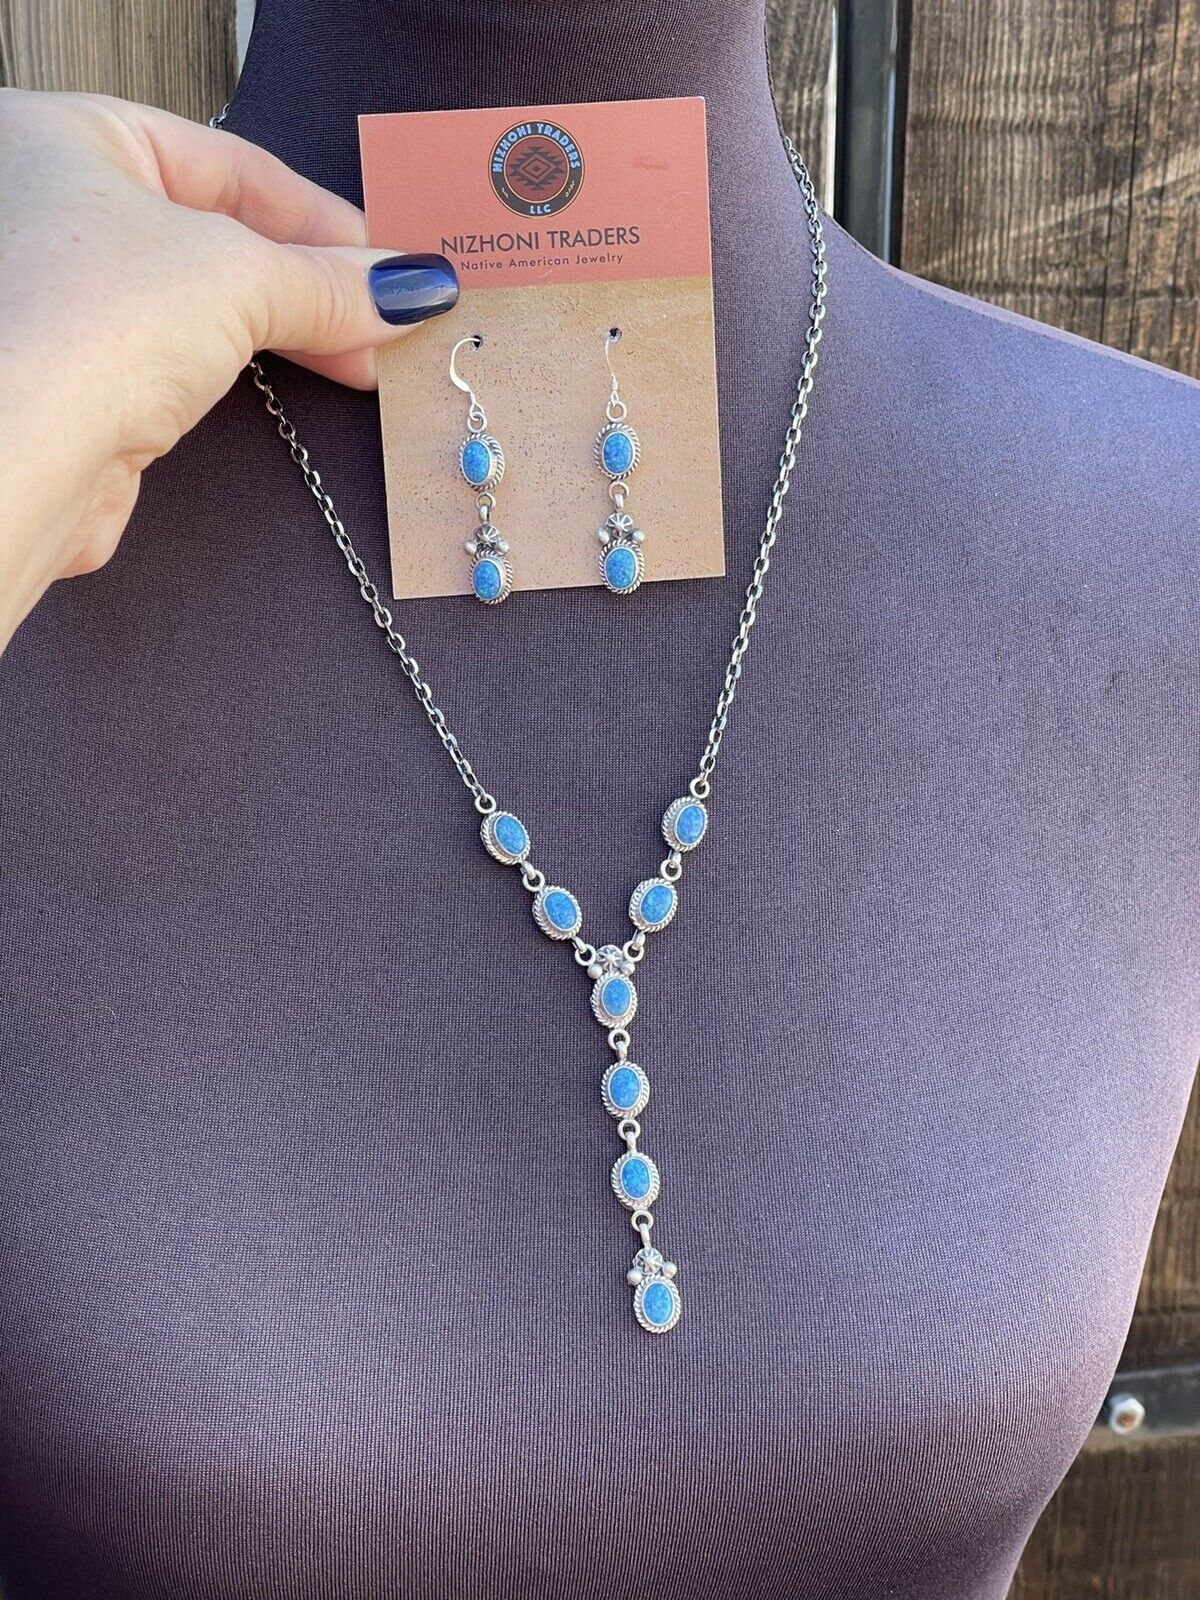 Navajo Sterling Silver &  Blue Iridescent Opal Lariat Necklace & Earring Set